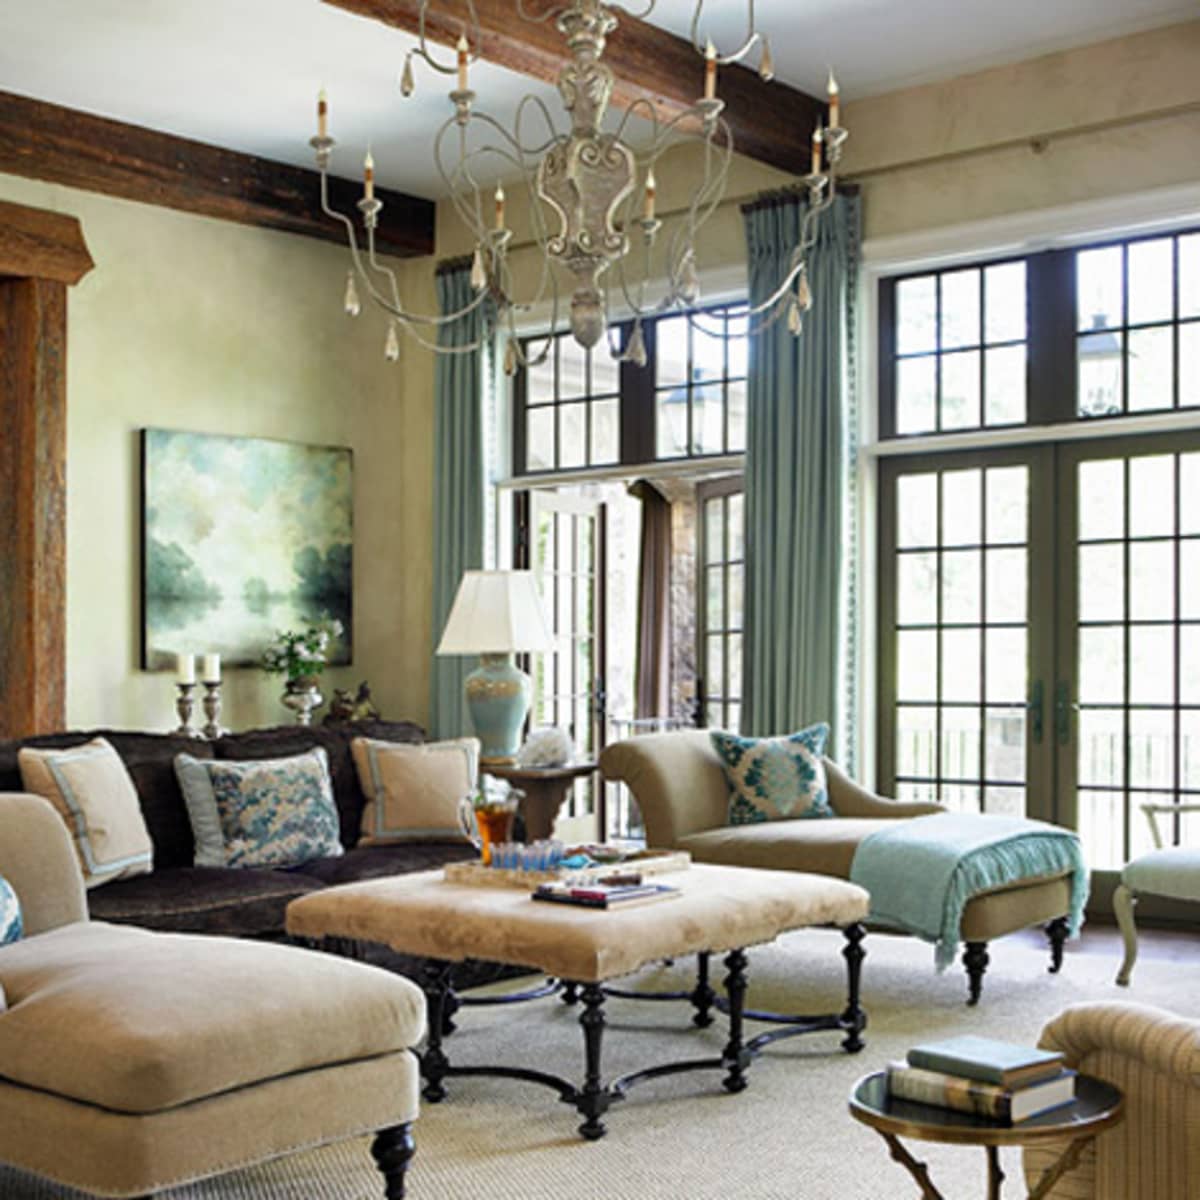 Traditional Interior Design: Everything You Need to Know